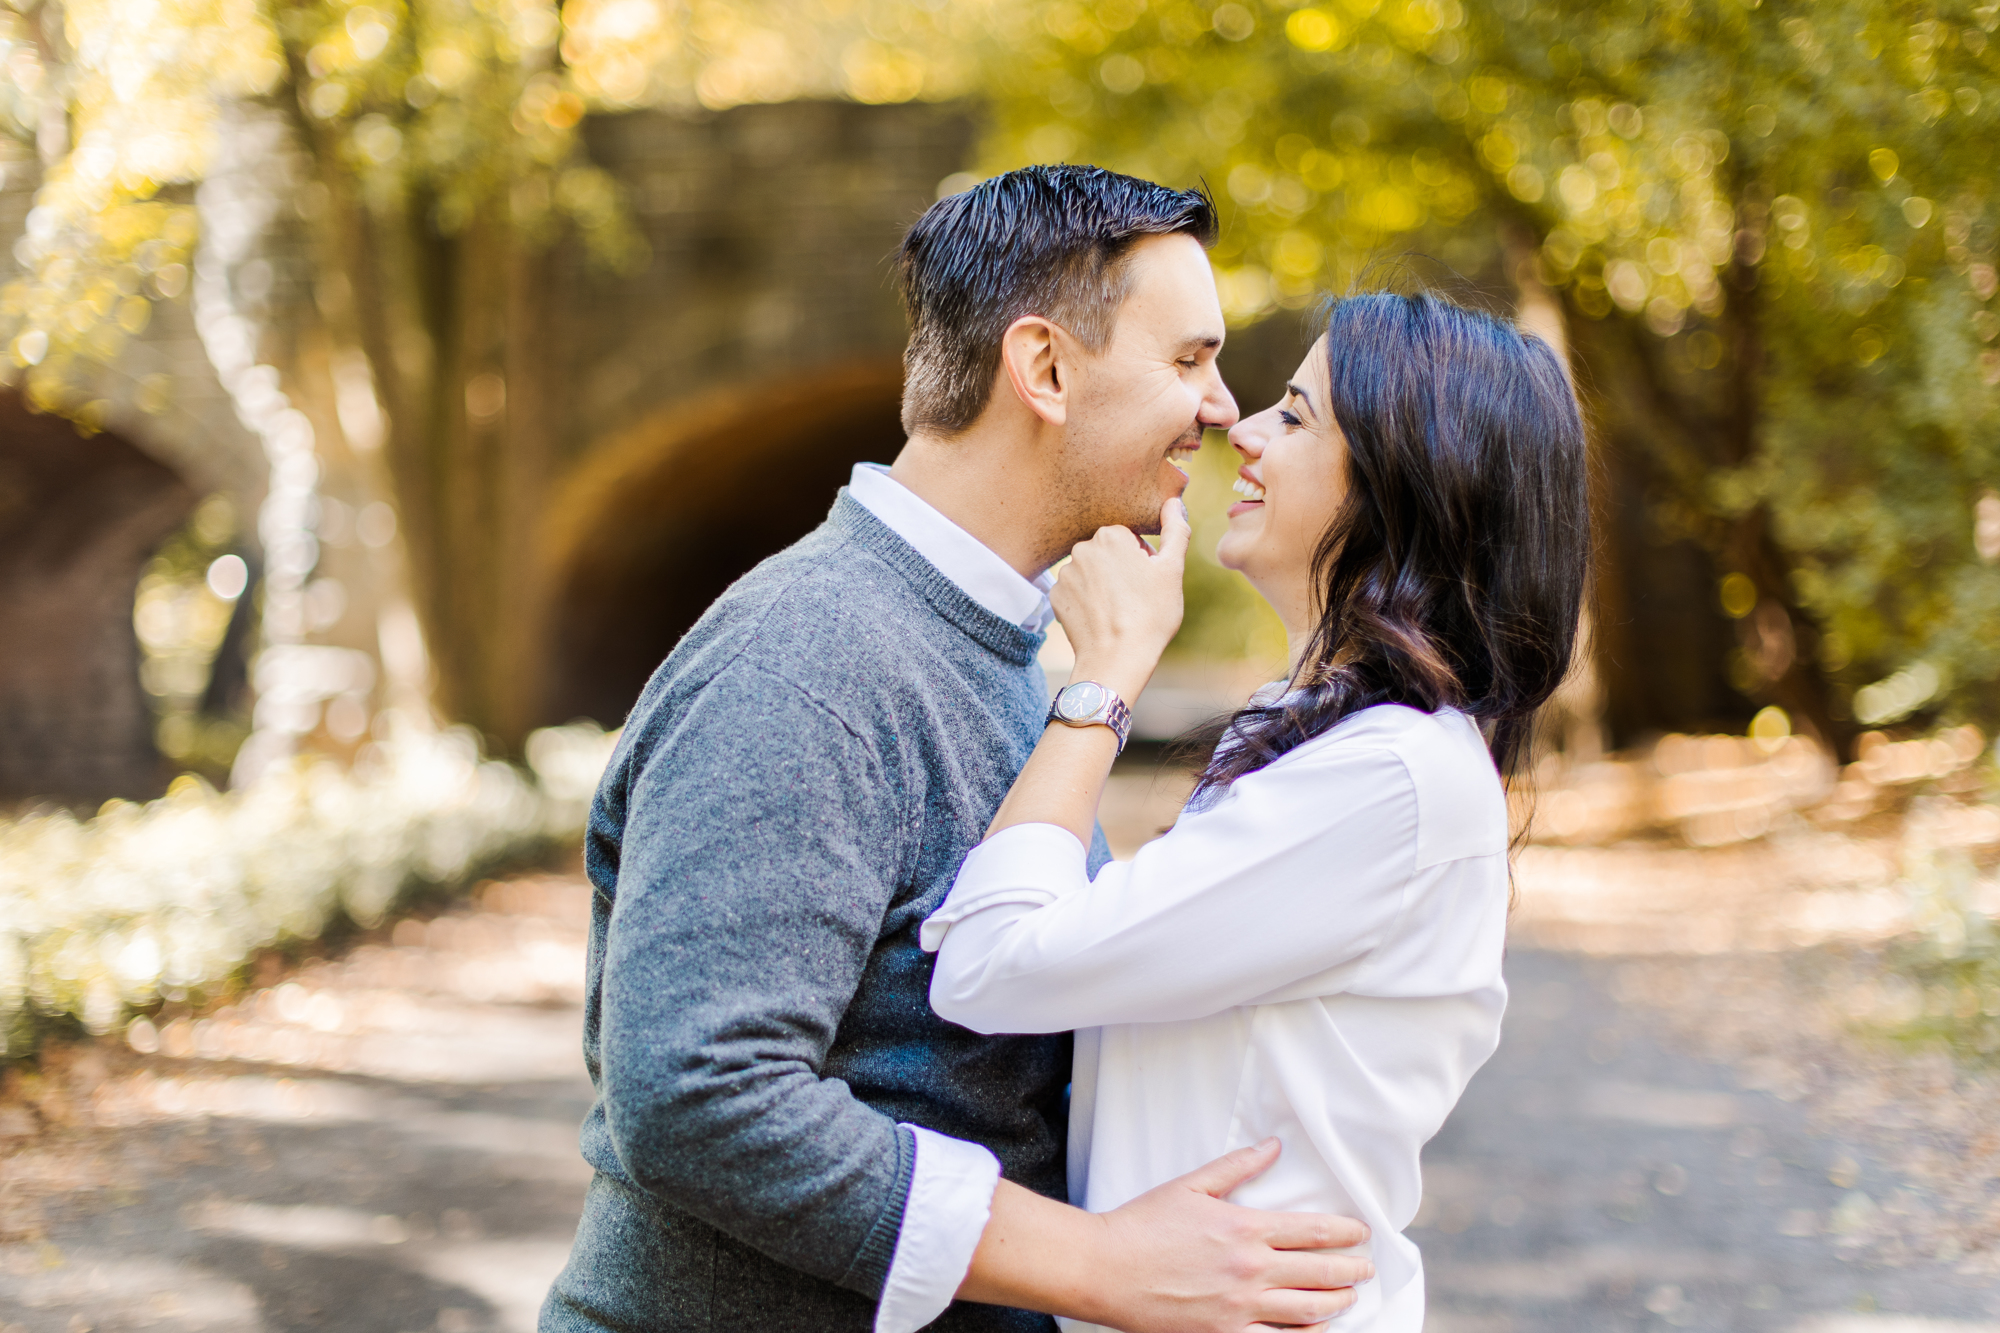 Timeless Upper West Side Engagement Photo Shoot in NYC